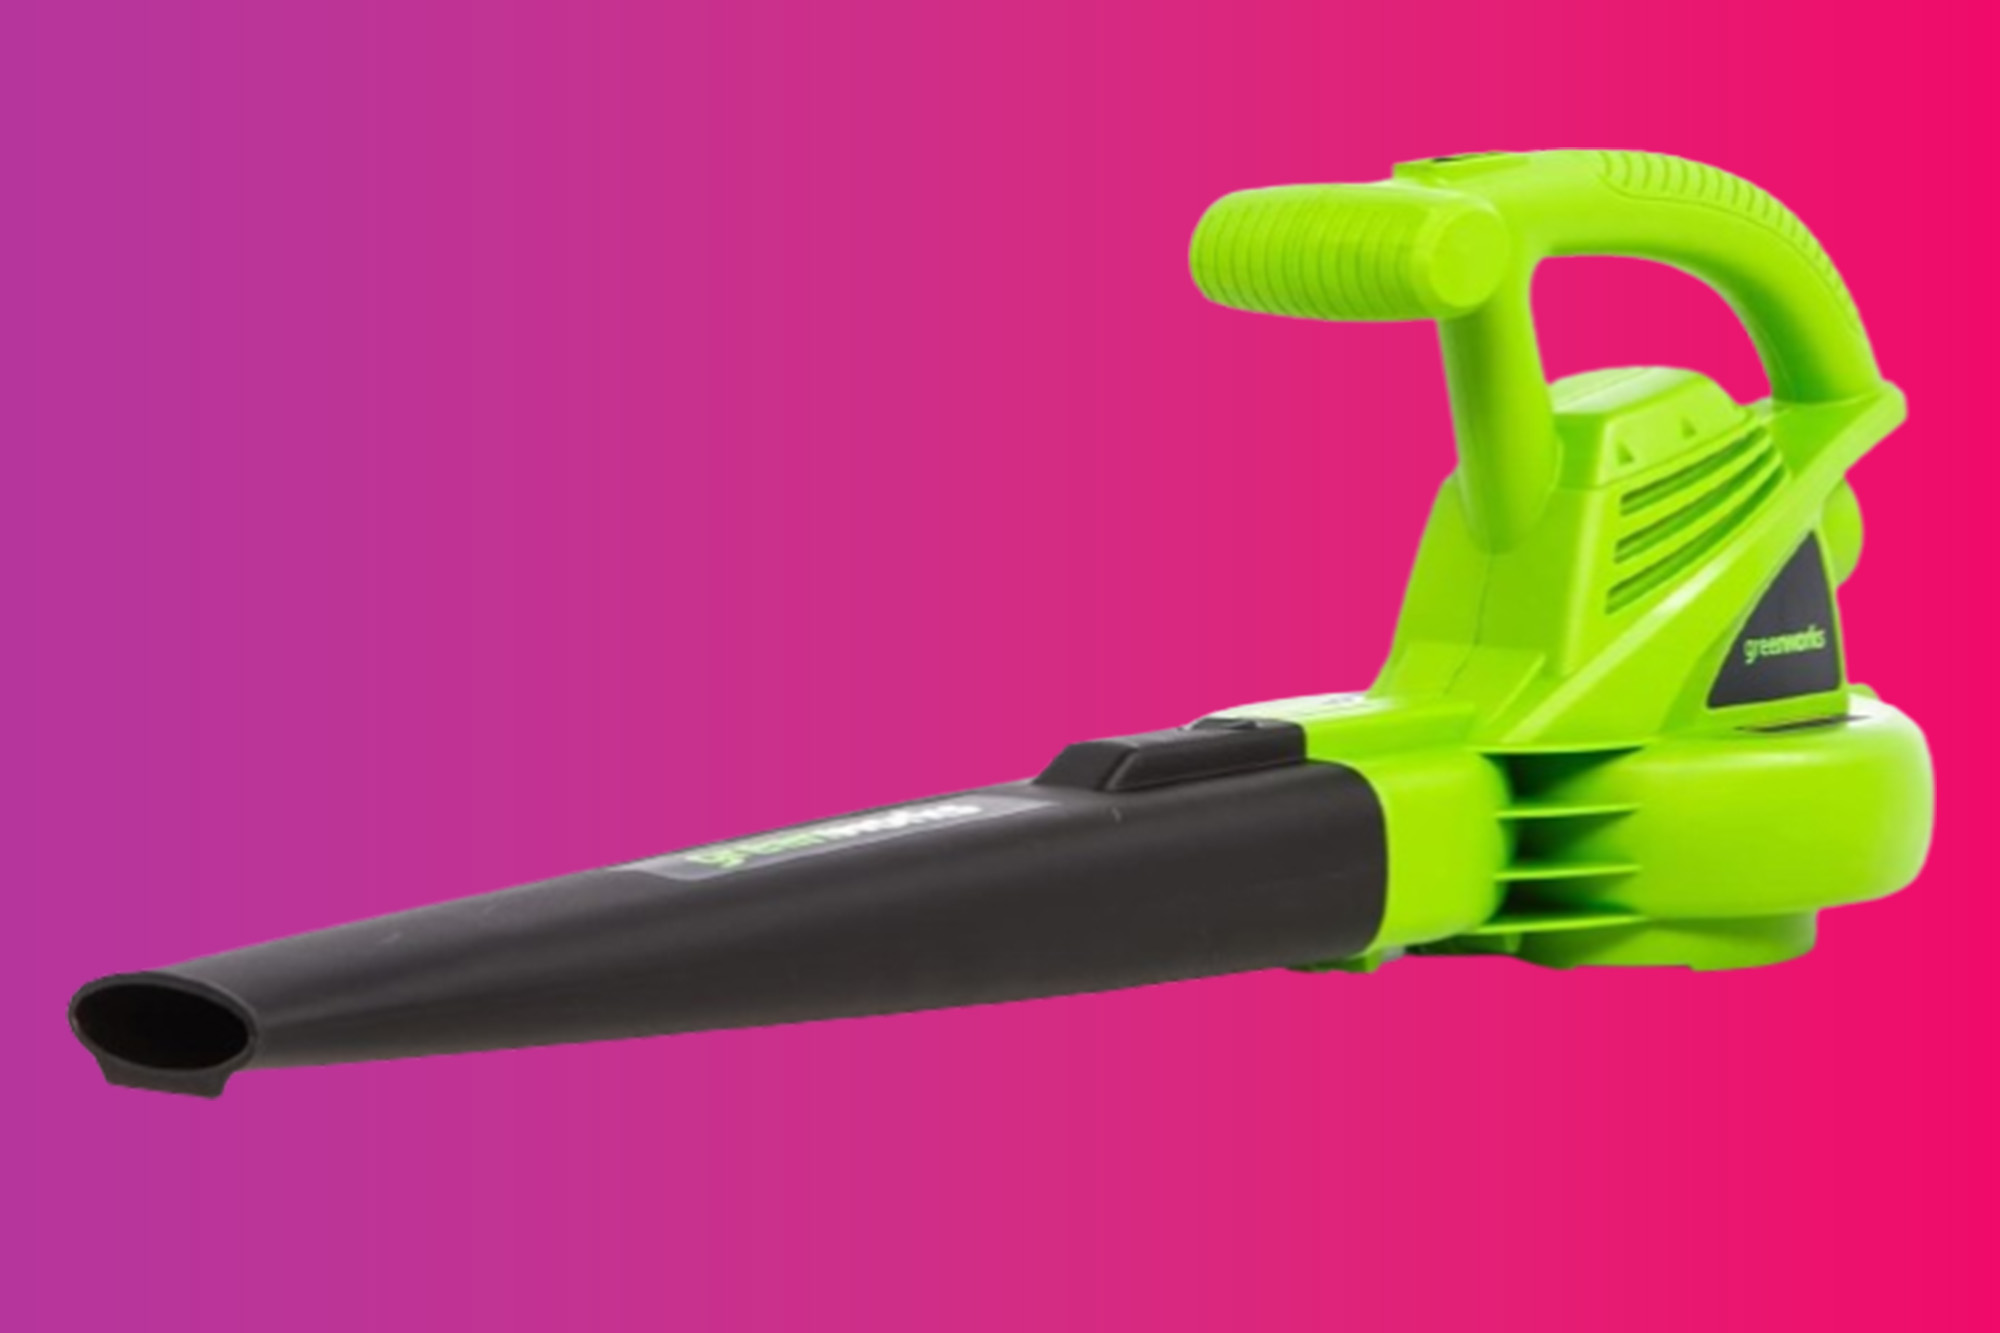 Make fall cleanup a breeze with 20% off Greenworks tools at Amazon